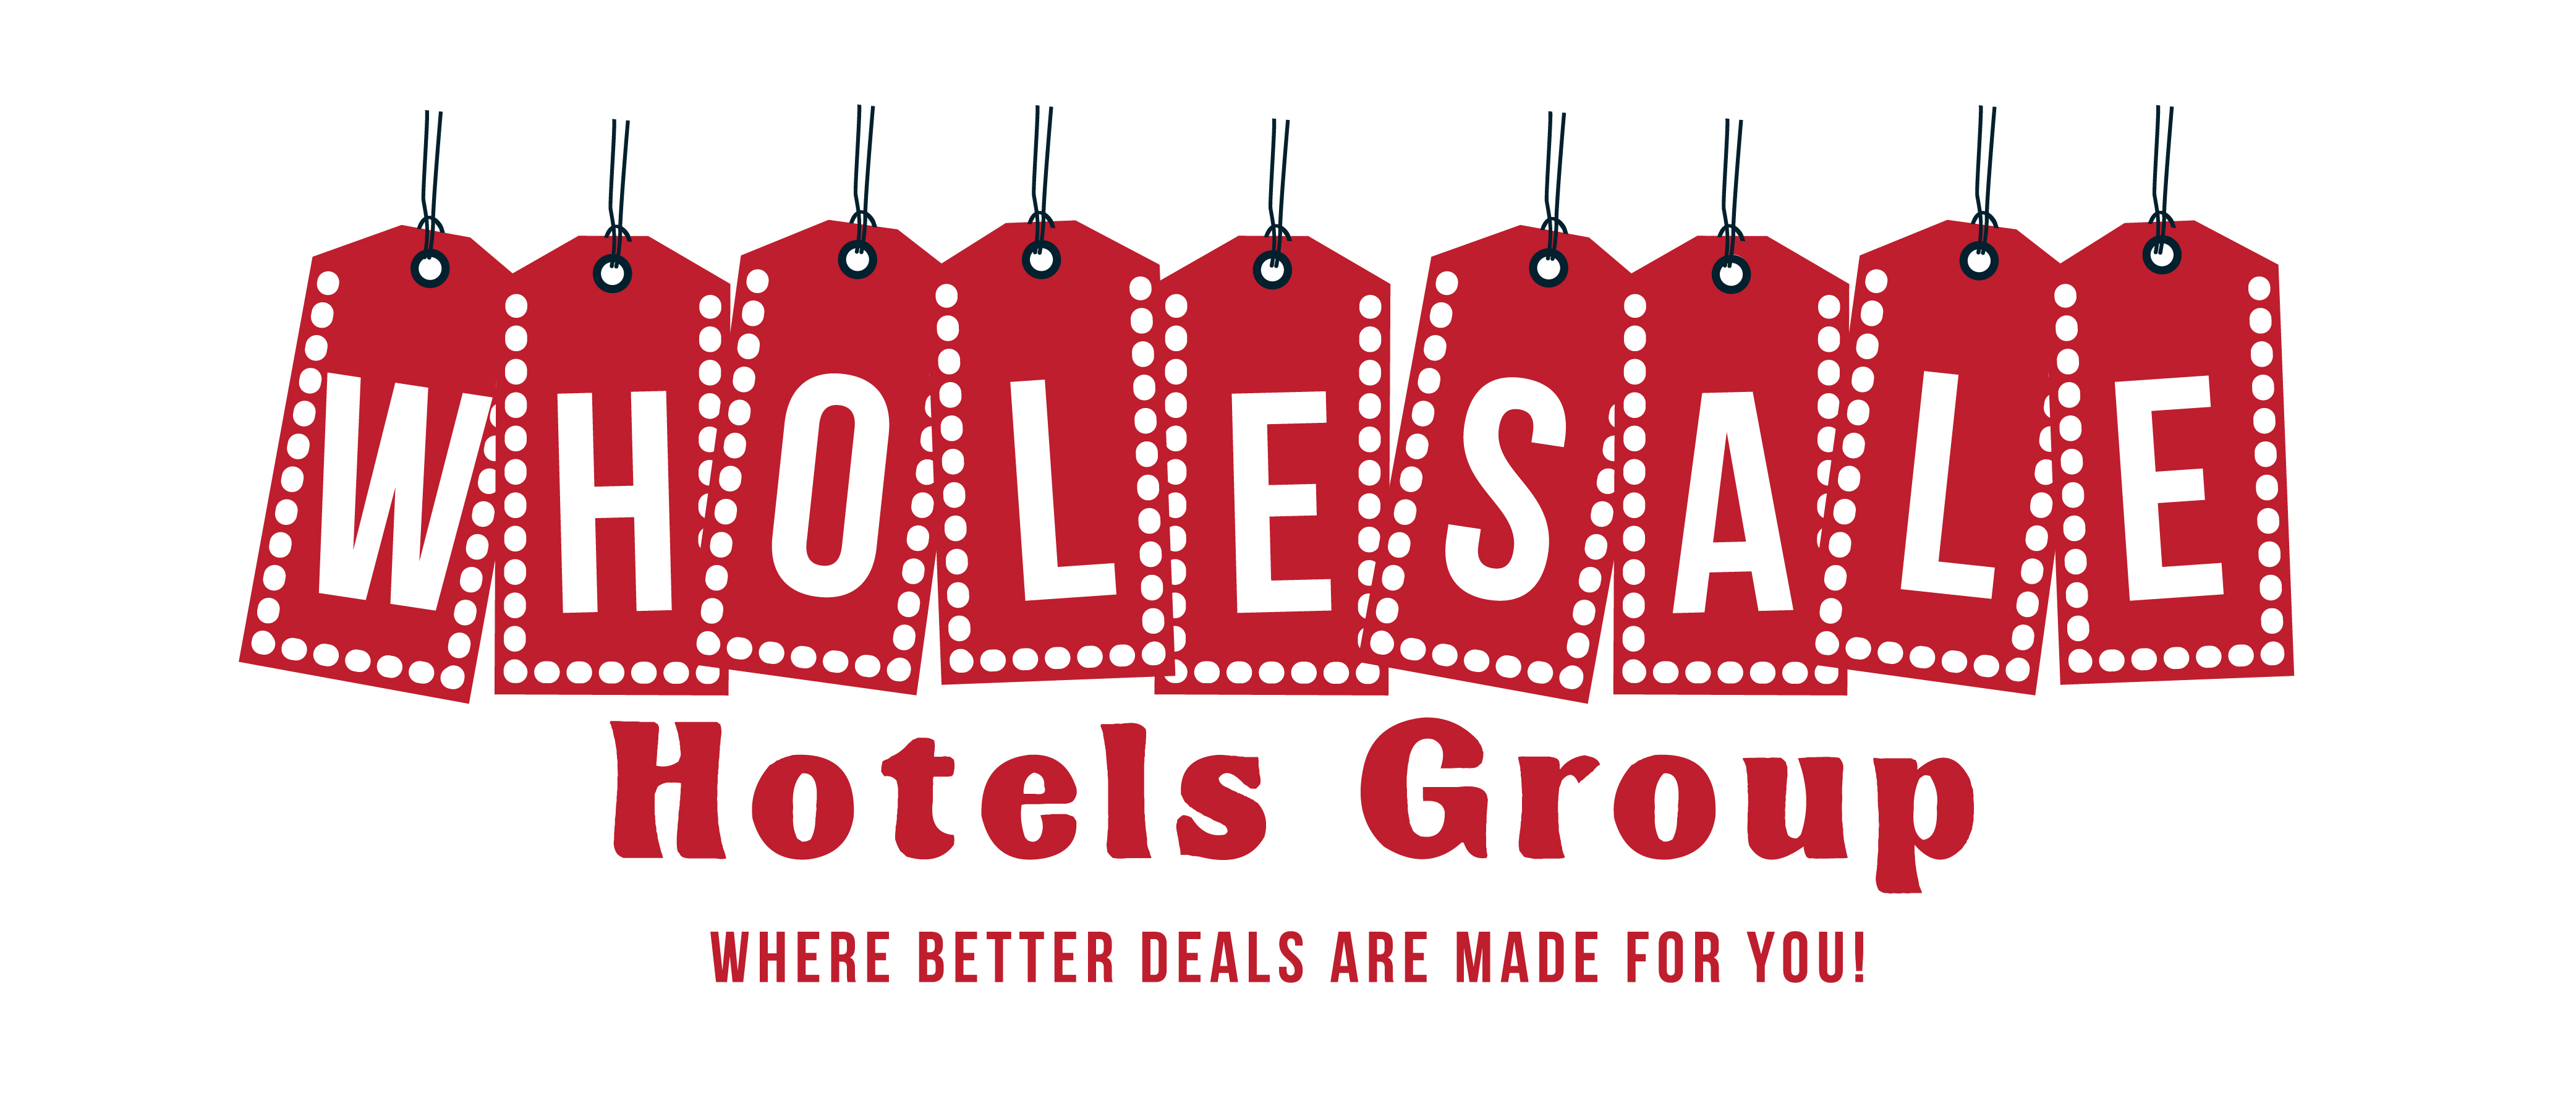 Wholesale Hotels Group - Hotel wholesale pricing at its best!